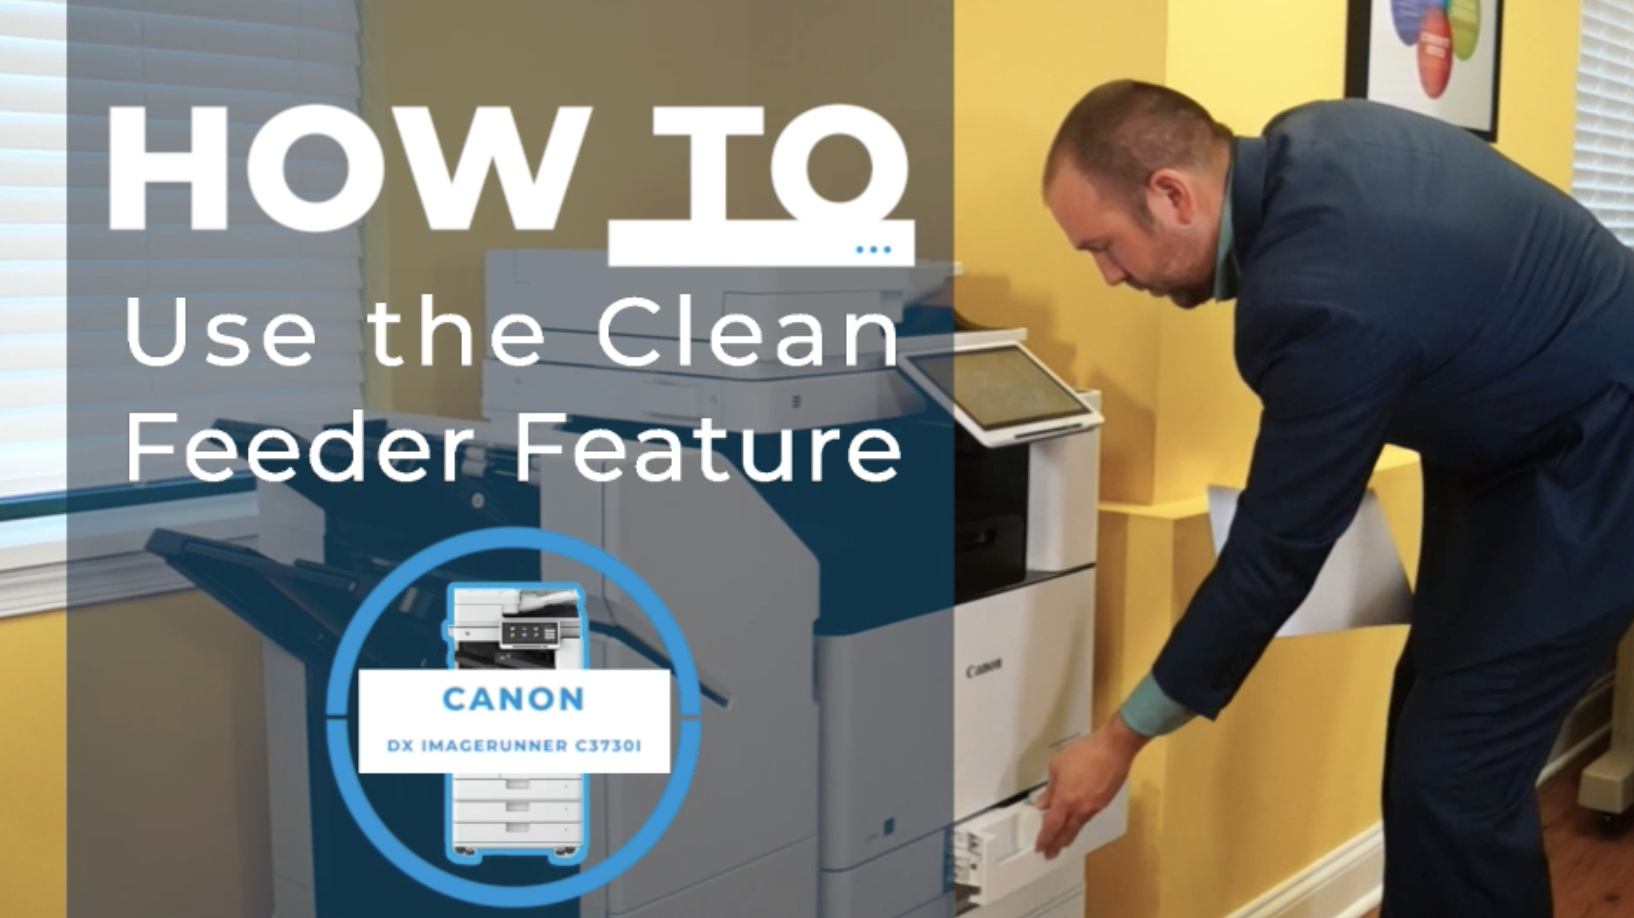 How to Use the Clean Feeder Feature